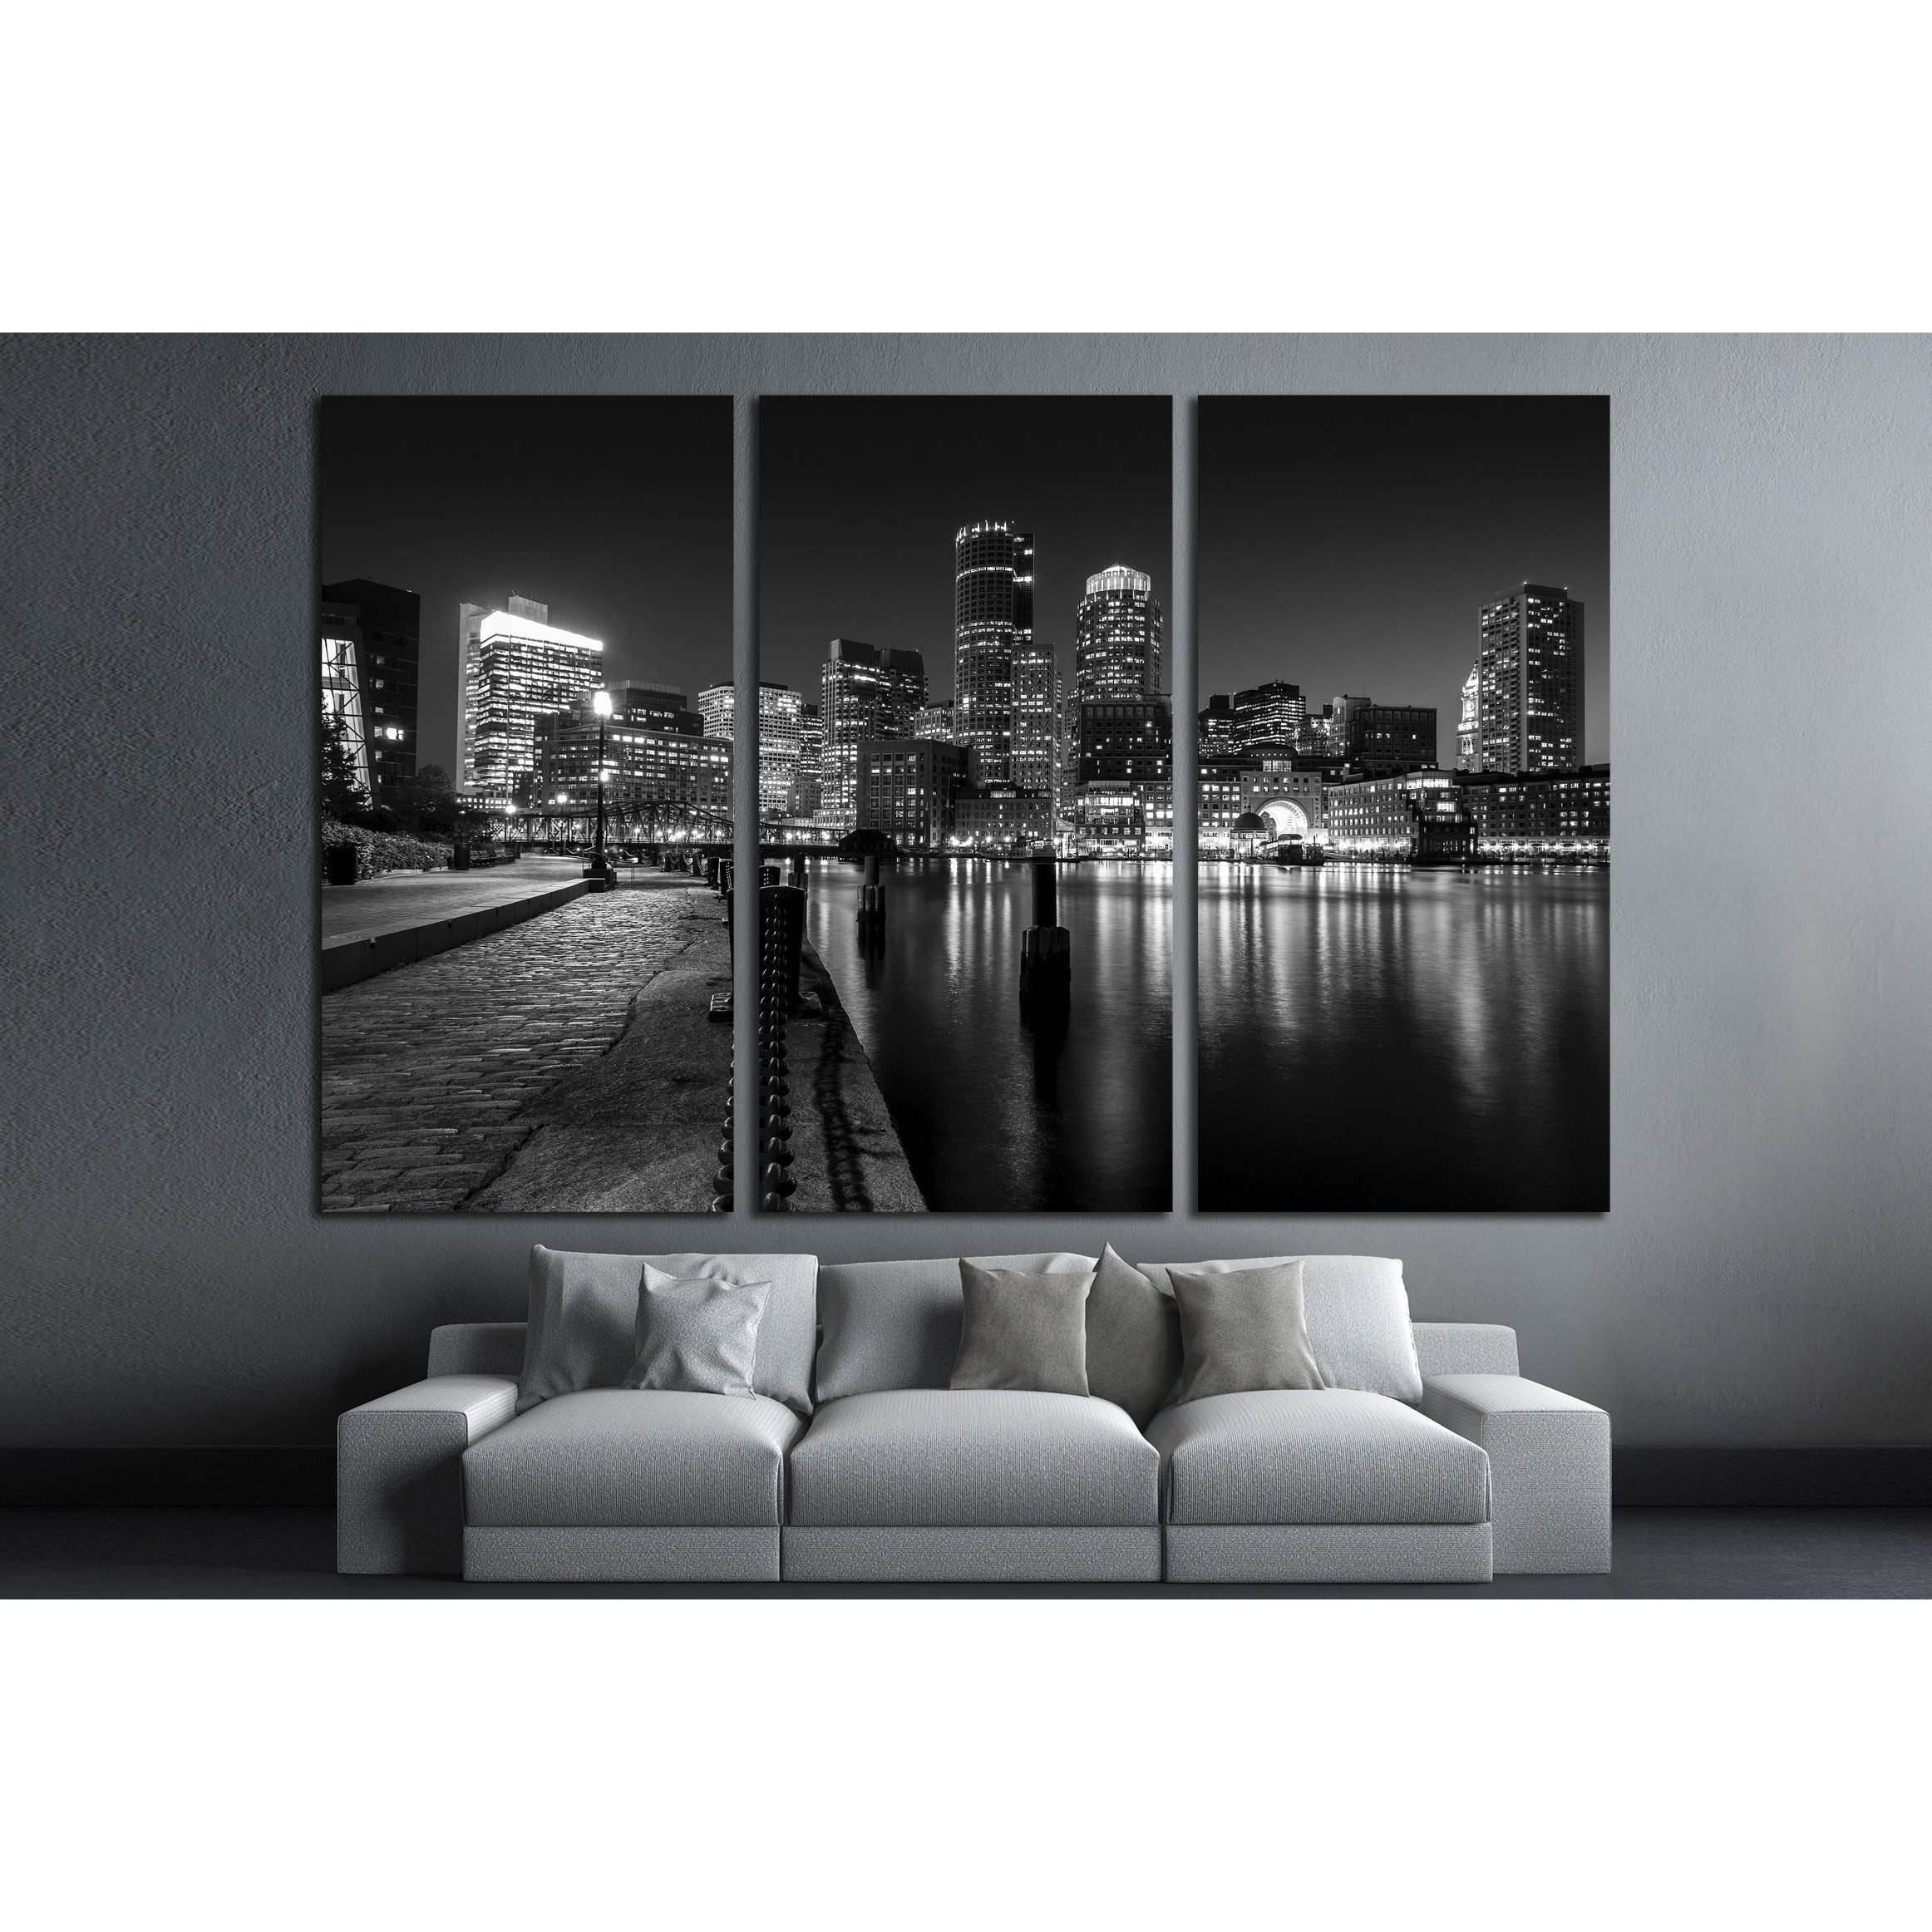 Boston Harbor at night in Black and White. Massachusetts, USA №2143 Ready to Hang Canvas Print